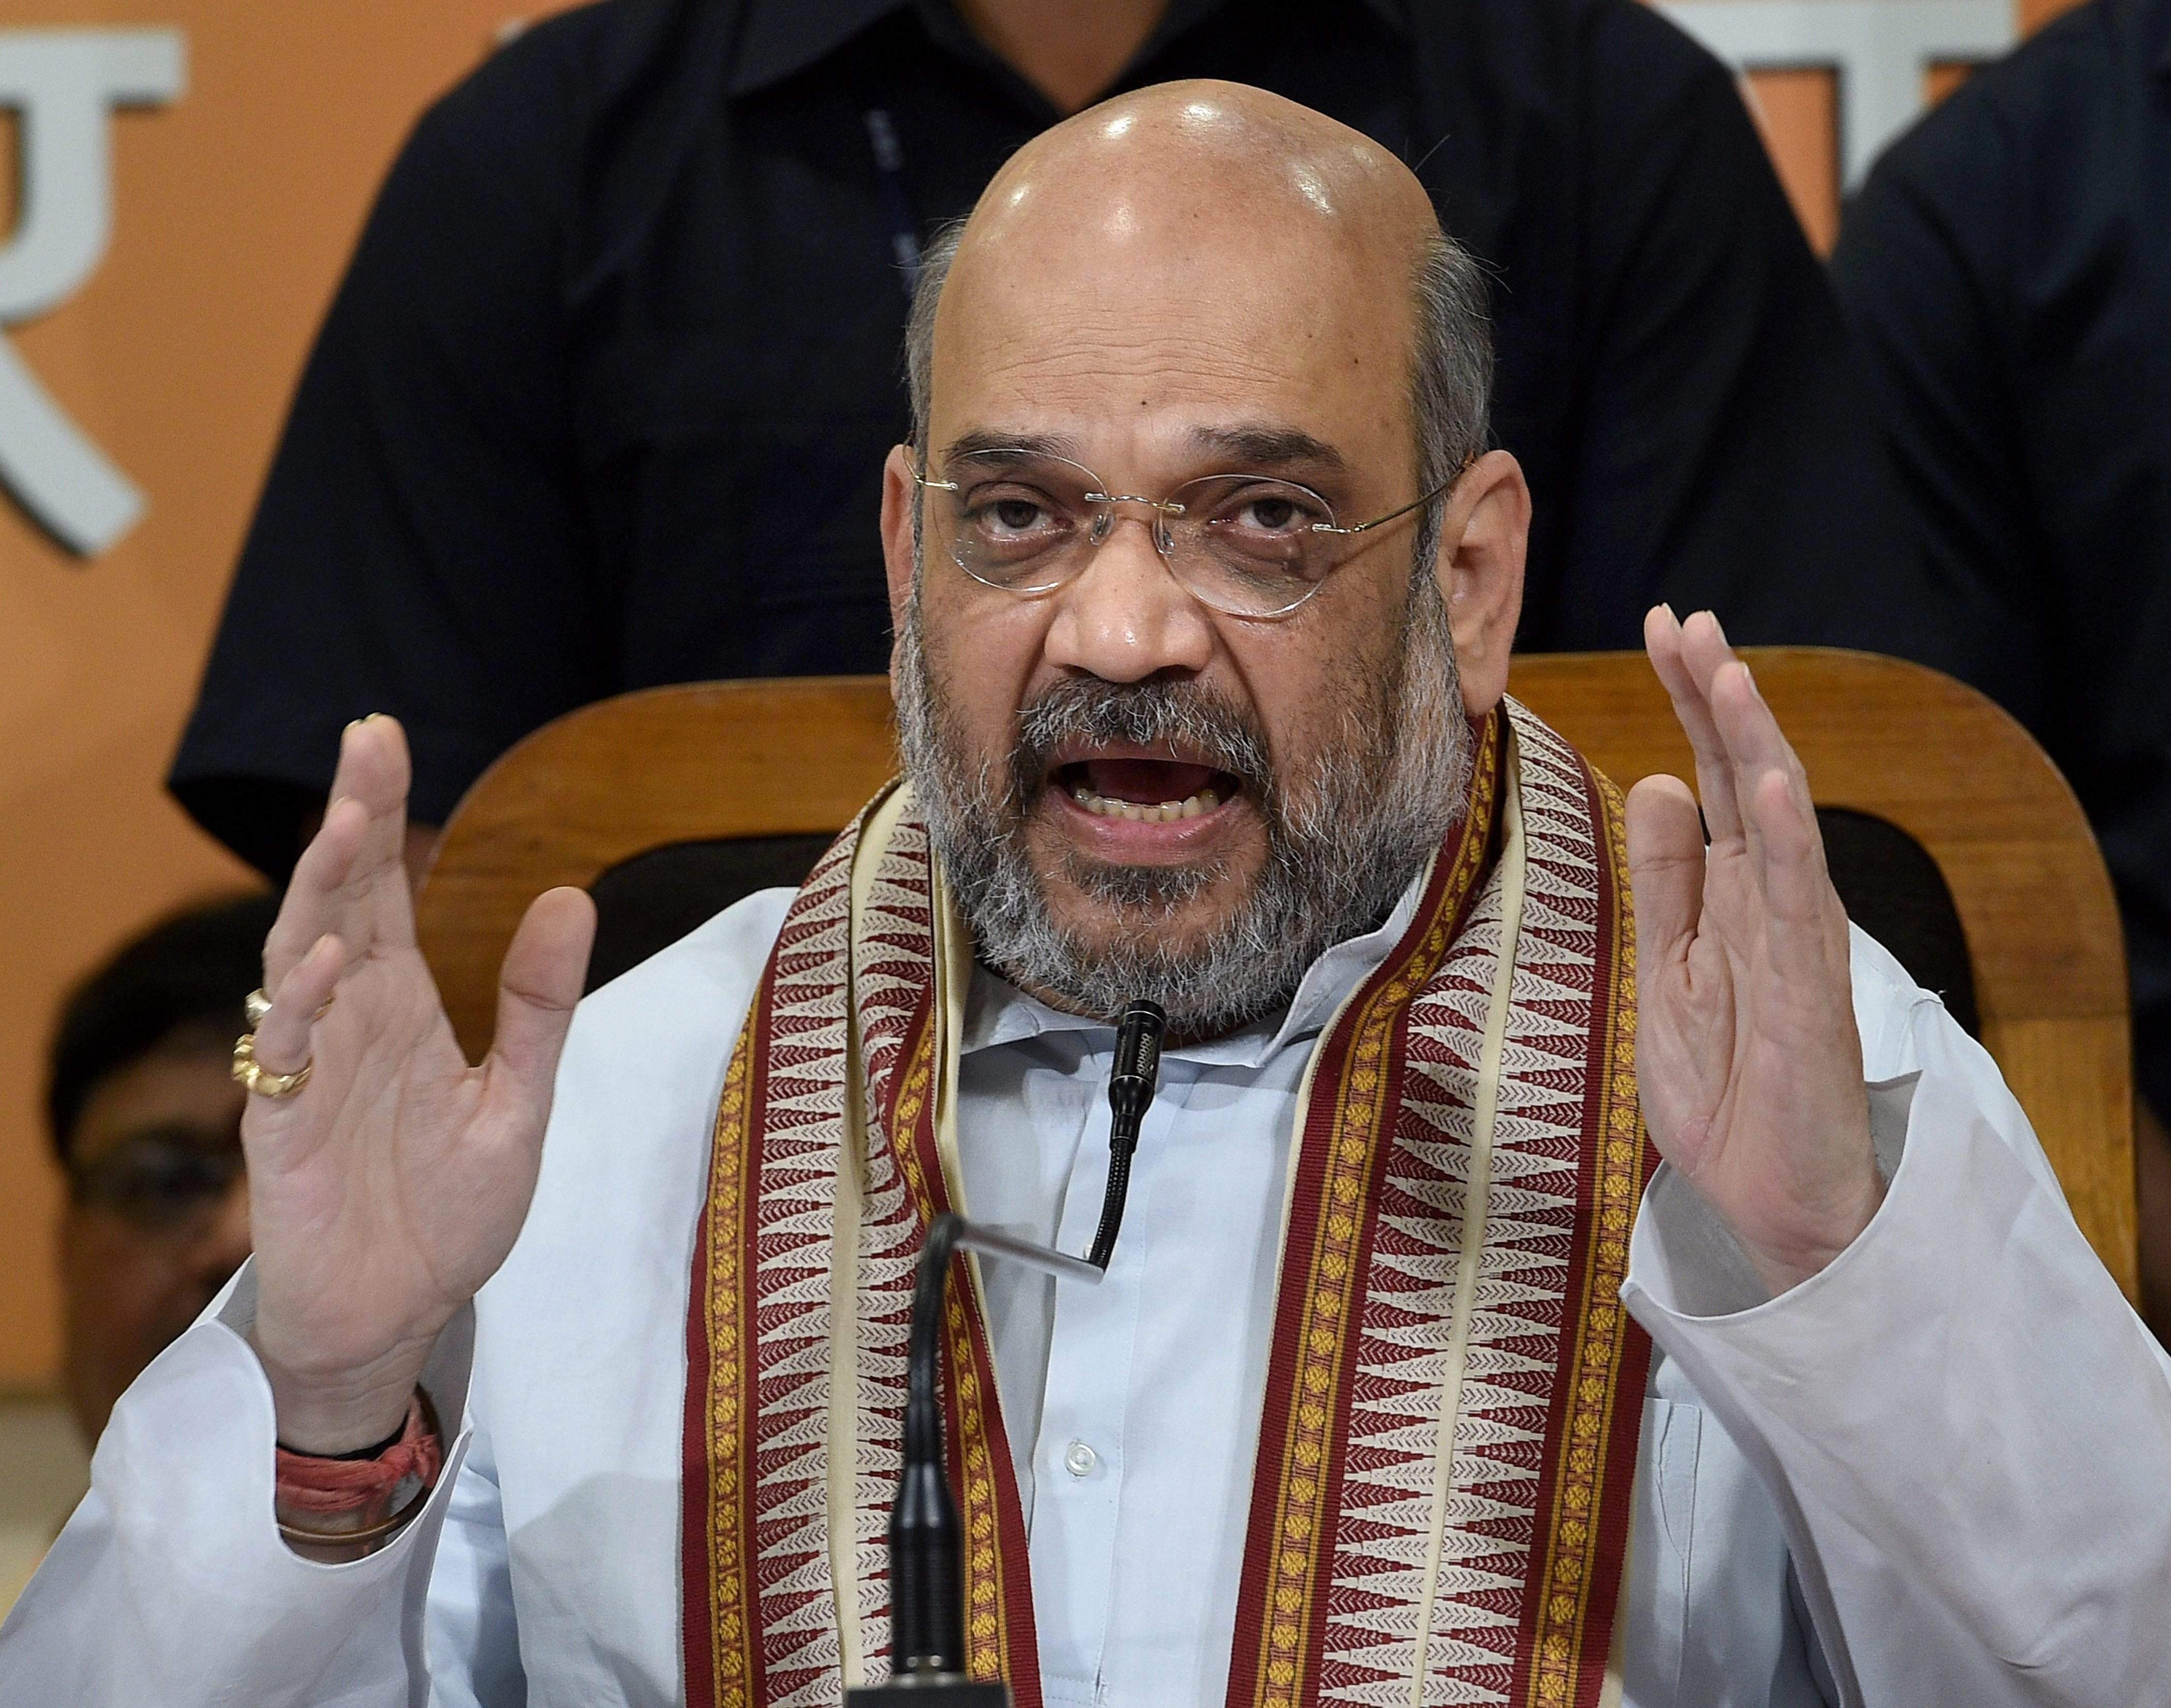 Amit Shah criticizes the RJD-JDU coalition as an "oil-water alliance" while also criticizing the INDIA bloc.